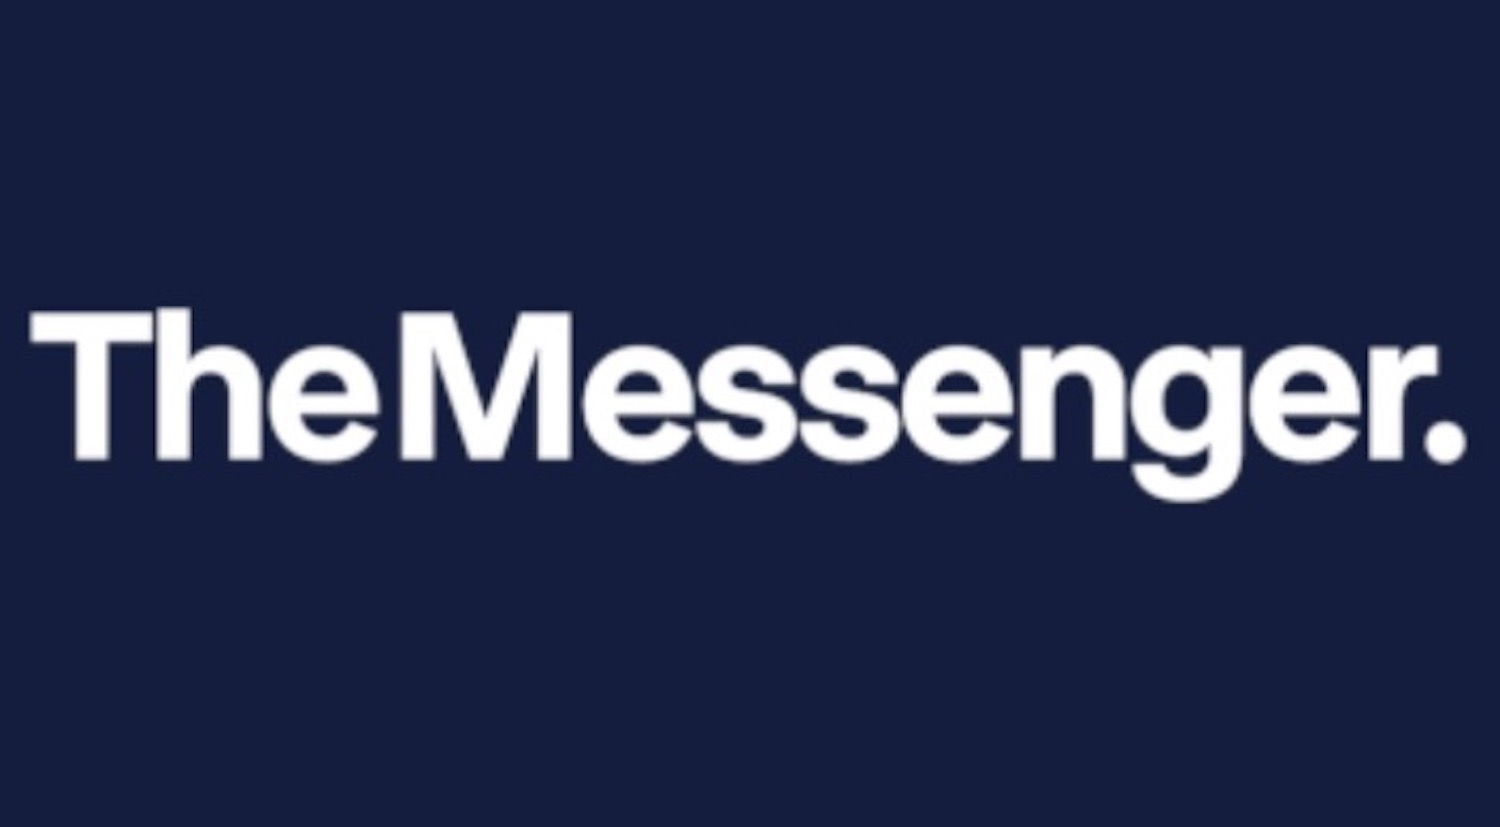 The Messenger's white-text on blue-field logo.